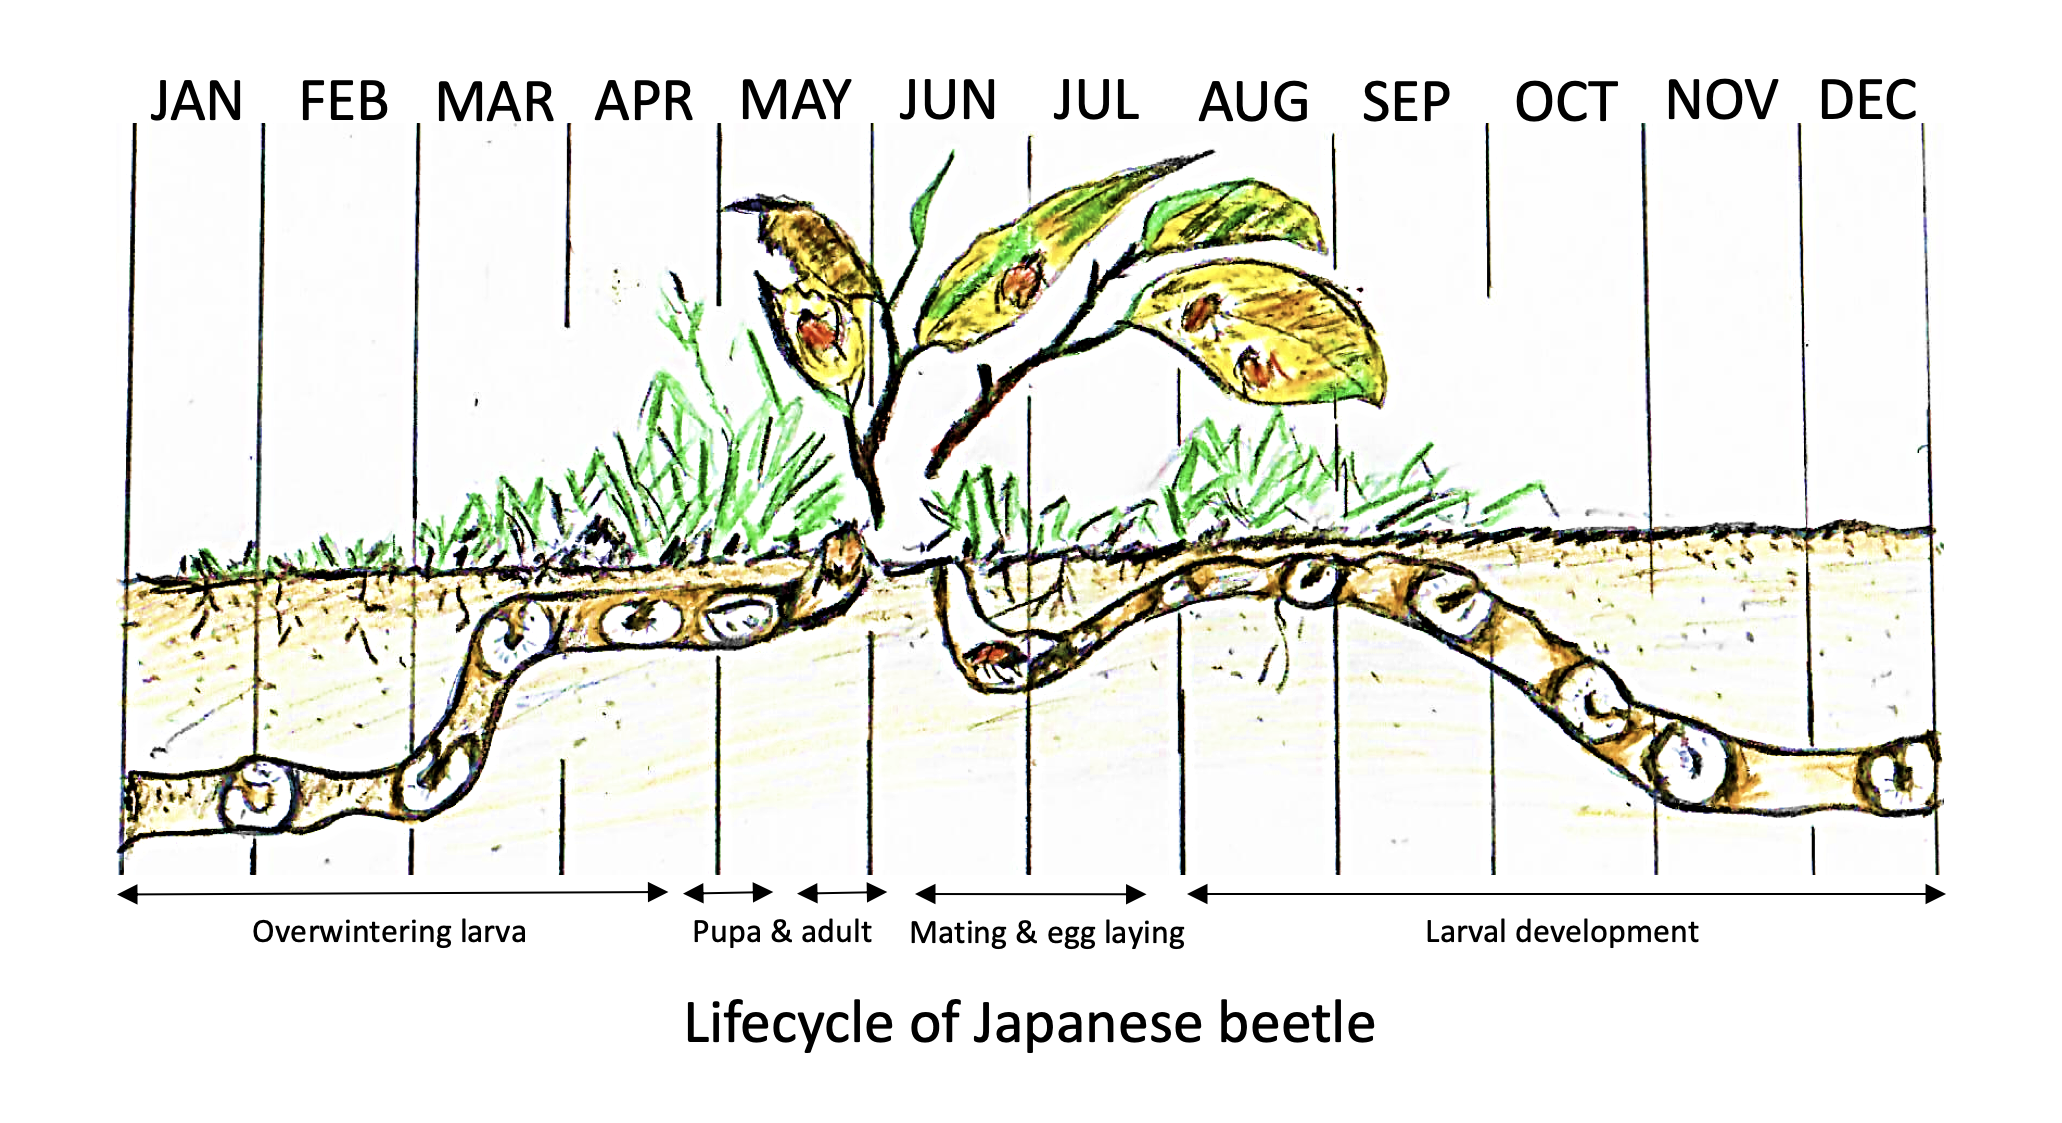 Japanese beetle life cycle annually. From January to April the larvae overwinter underground. From April to May they pupate and from May to June they emerge as adults. From June to July they mate and lay eggs, and from August to December the larvae develop underground.